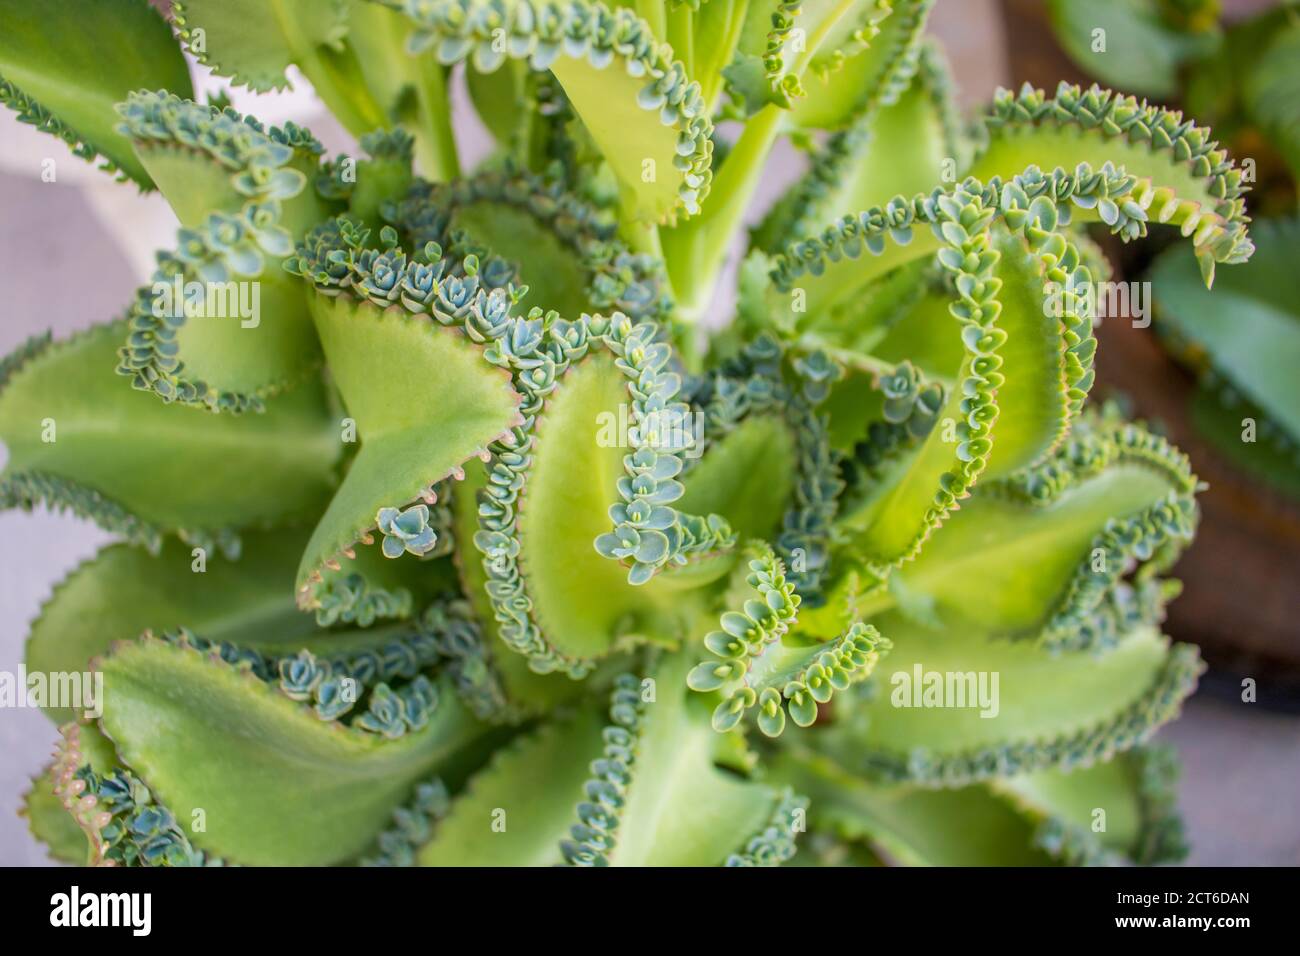 The reproductive leaves of Mother of thousands tree which is the asexual reproduction. Stock Photo